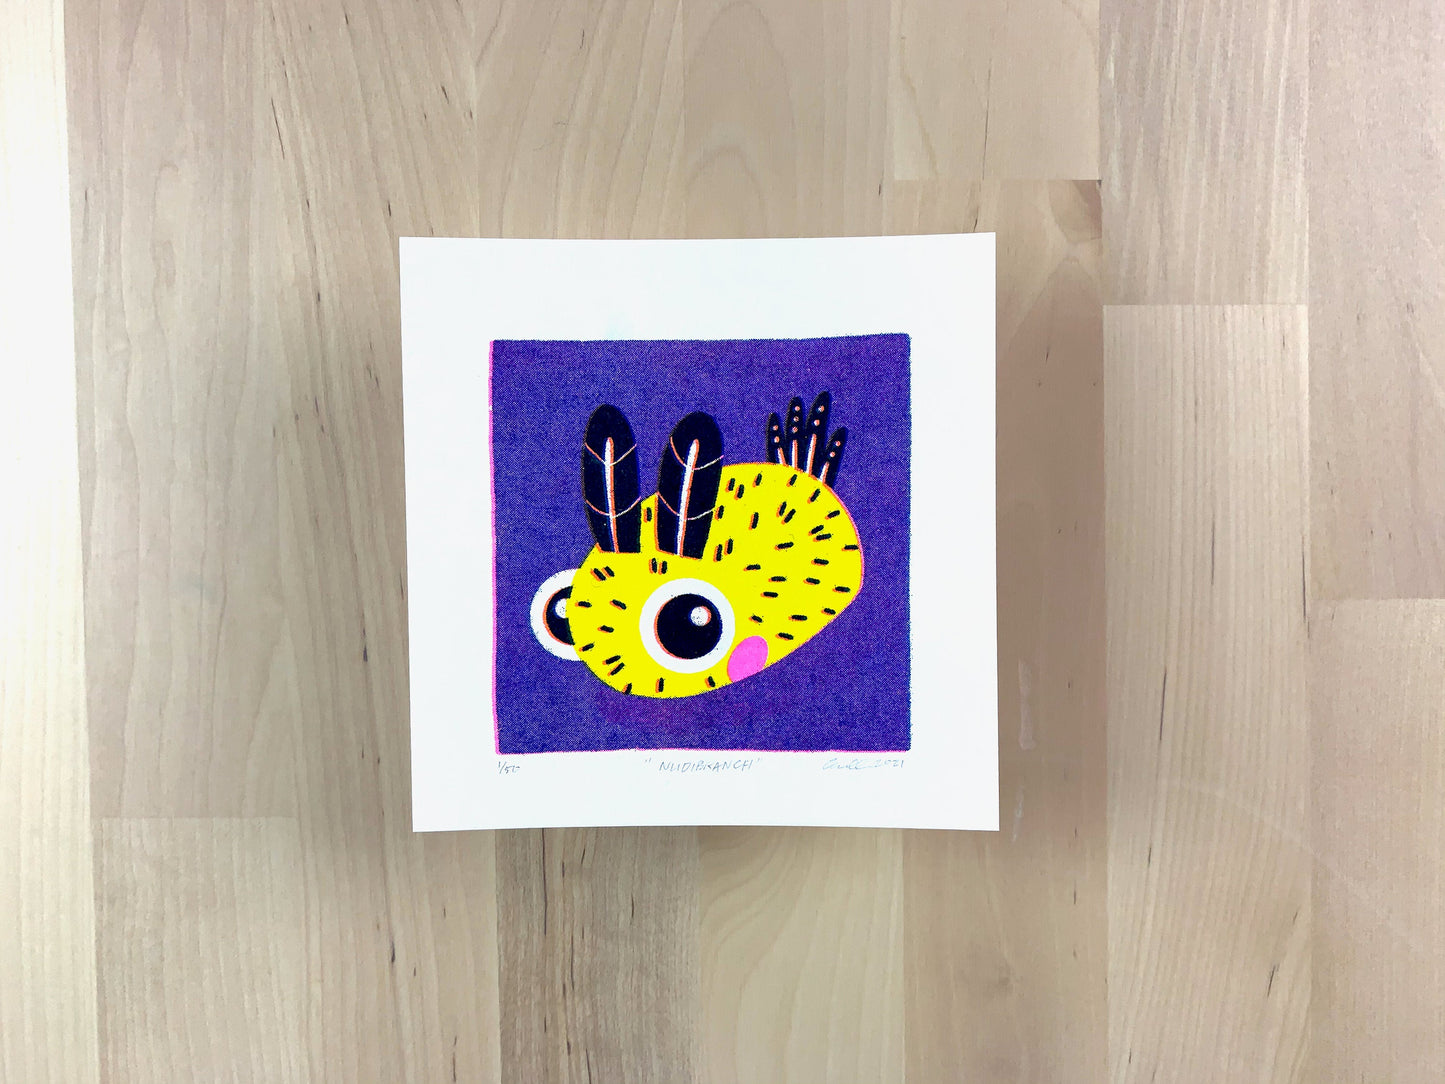 Risograph print of a cute nudibranch, sea bunny, illustration on a purple background.